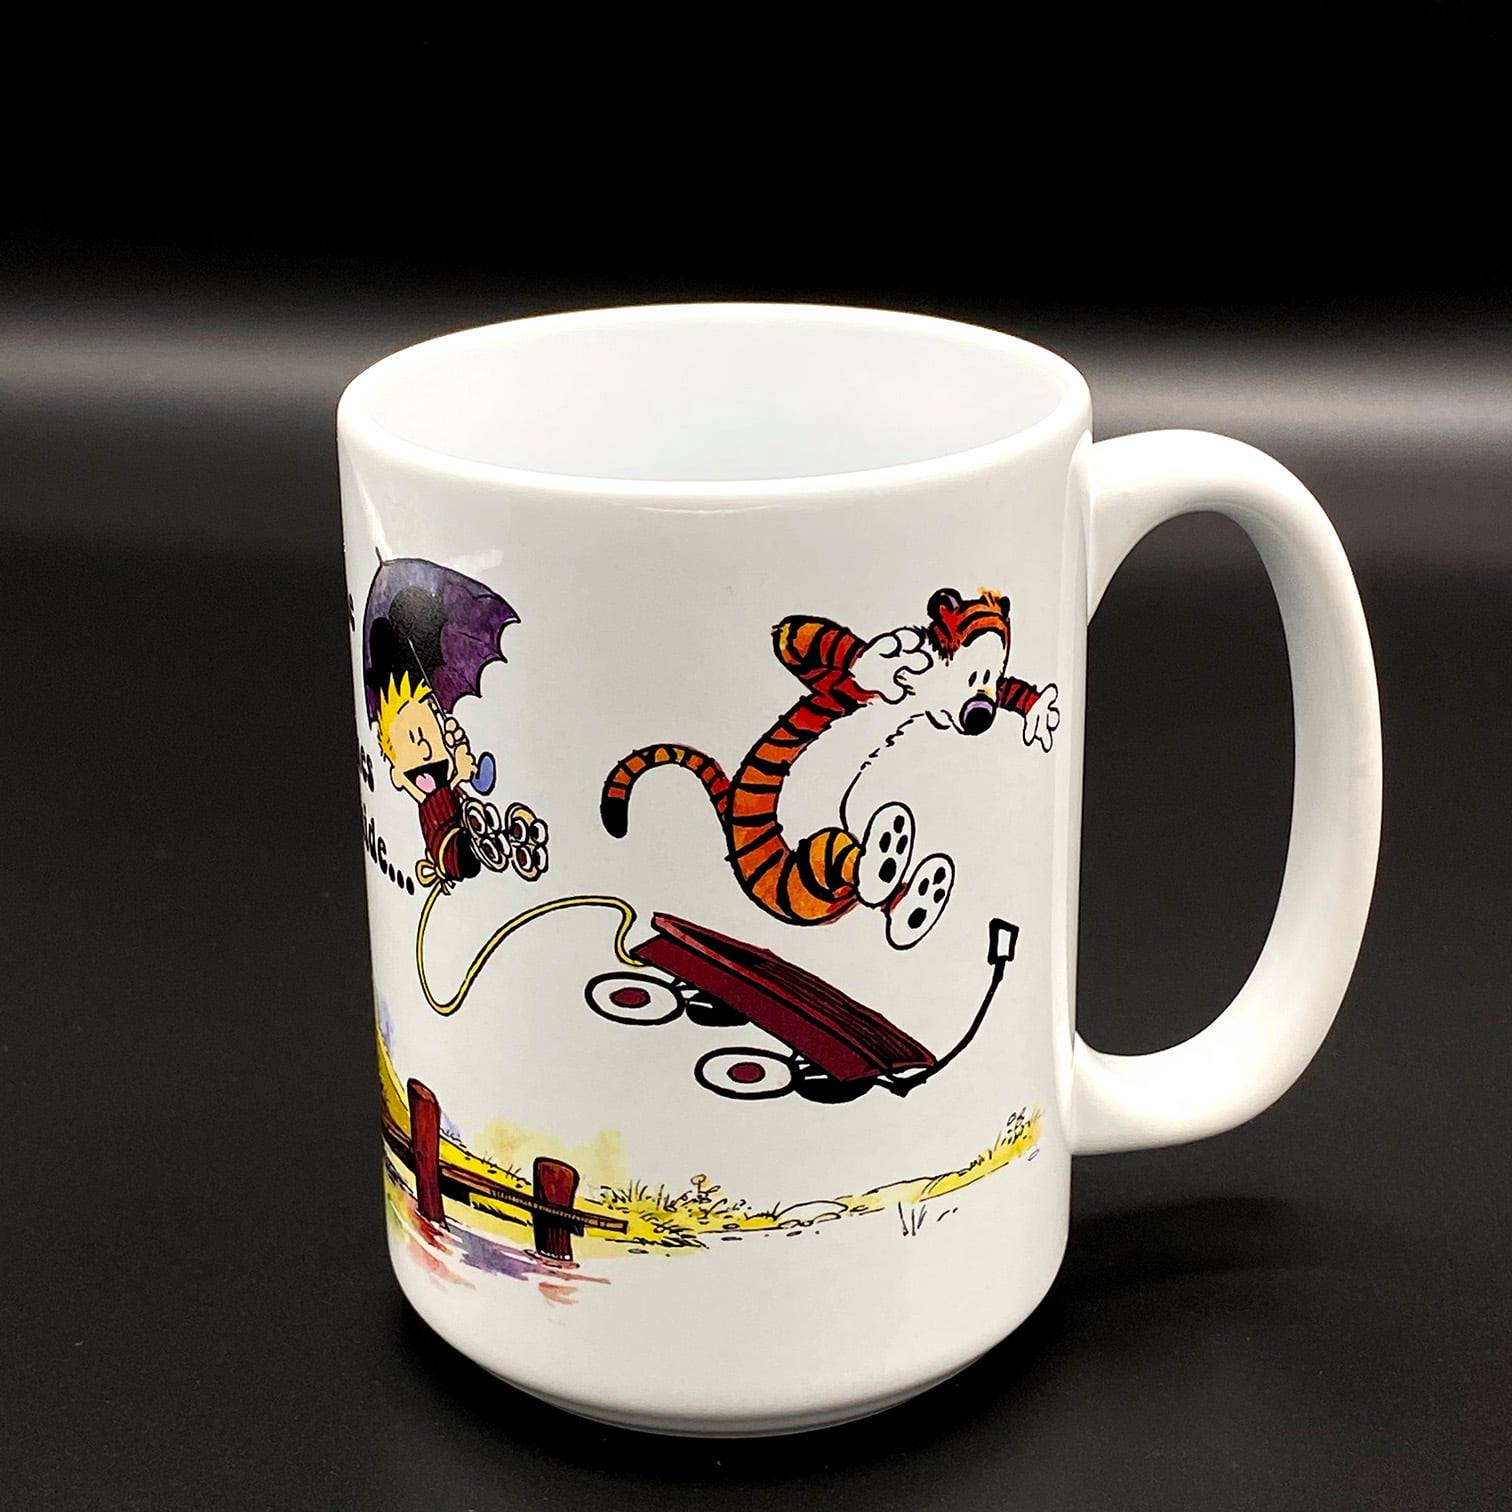 A white ceramic cup with a an image inspired by the Grateful Dead Song